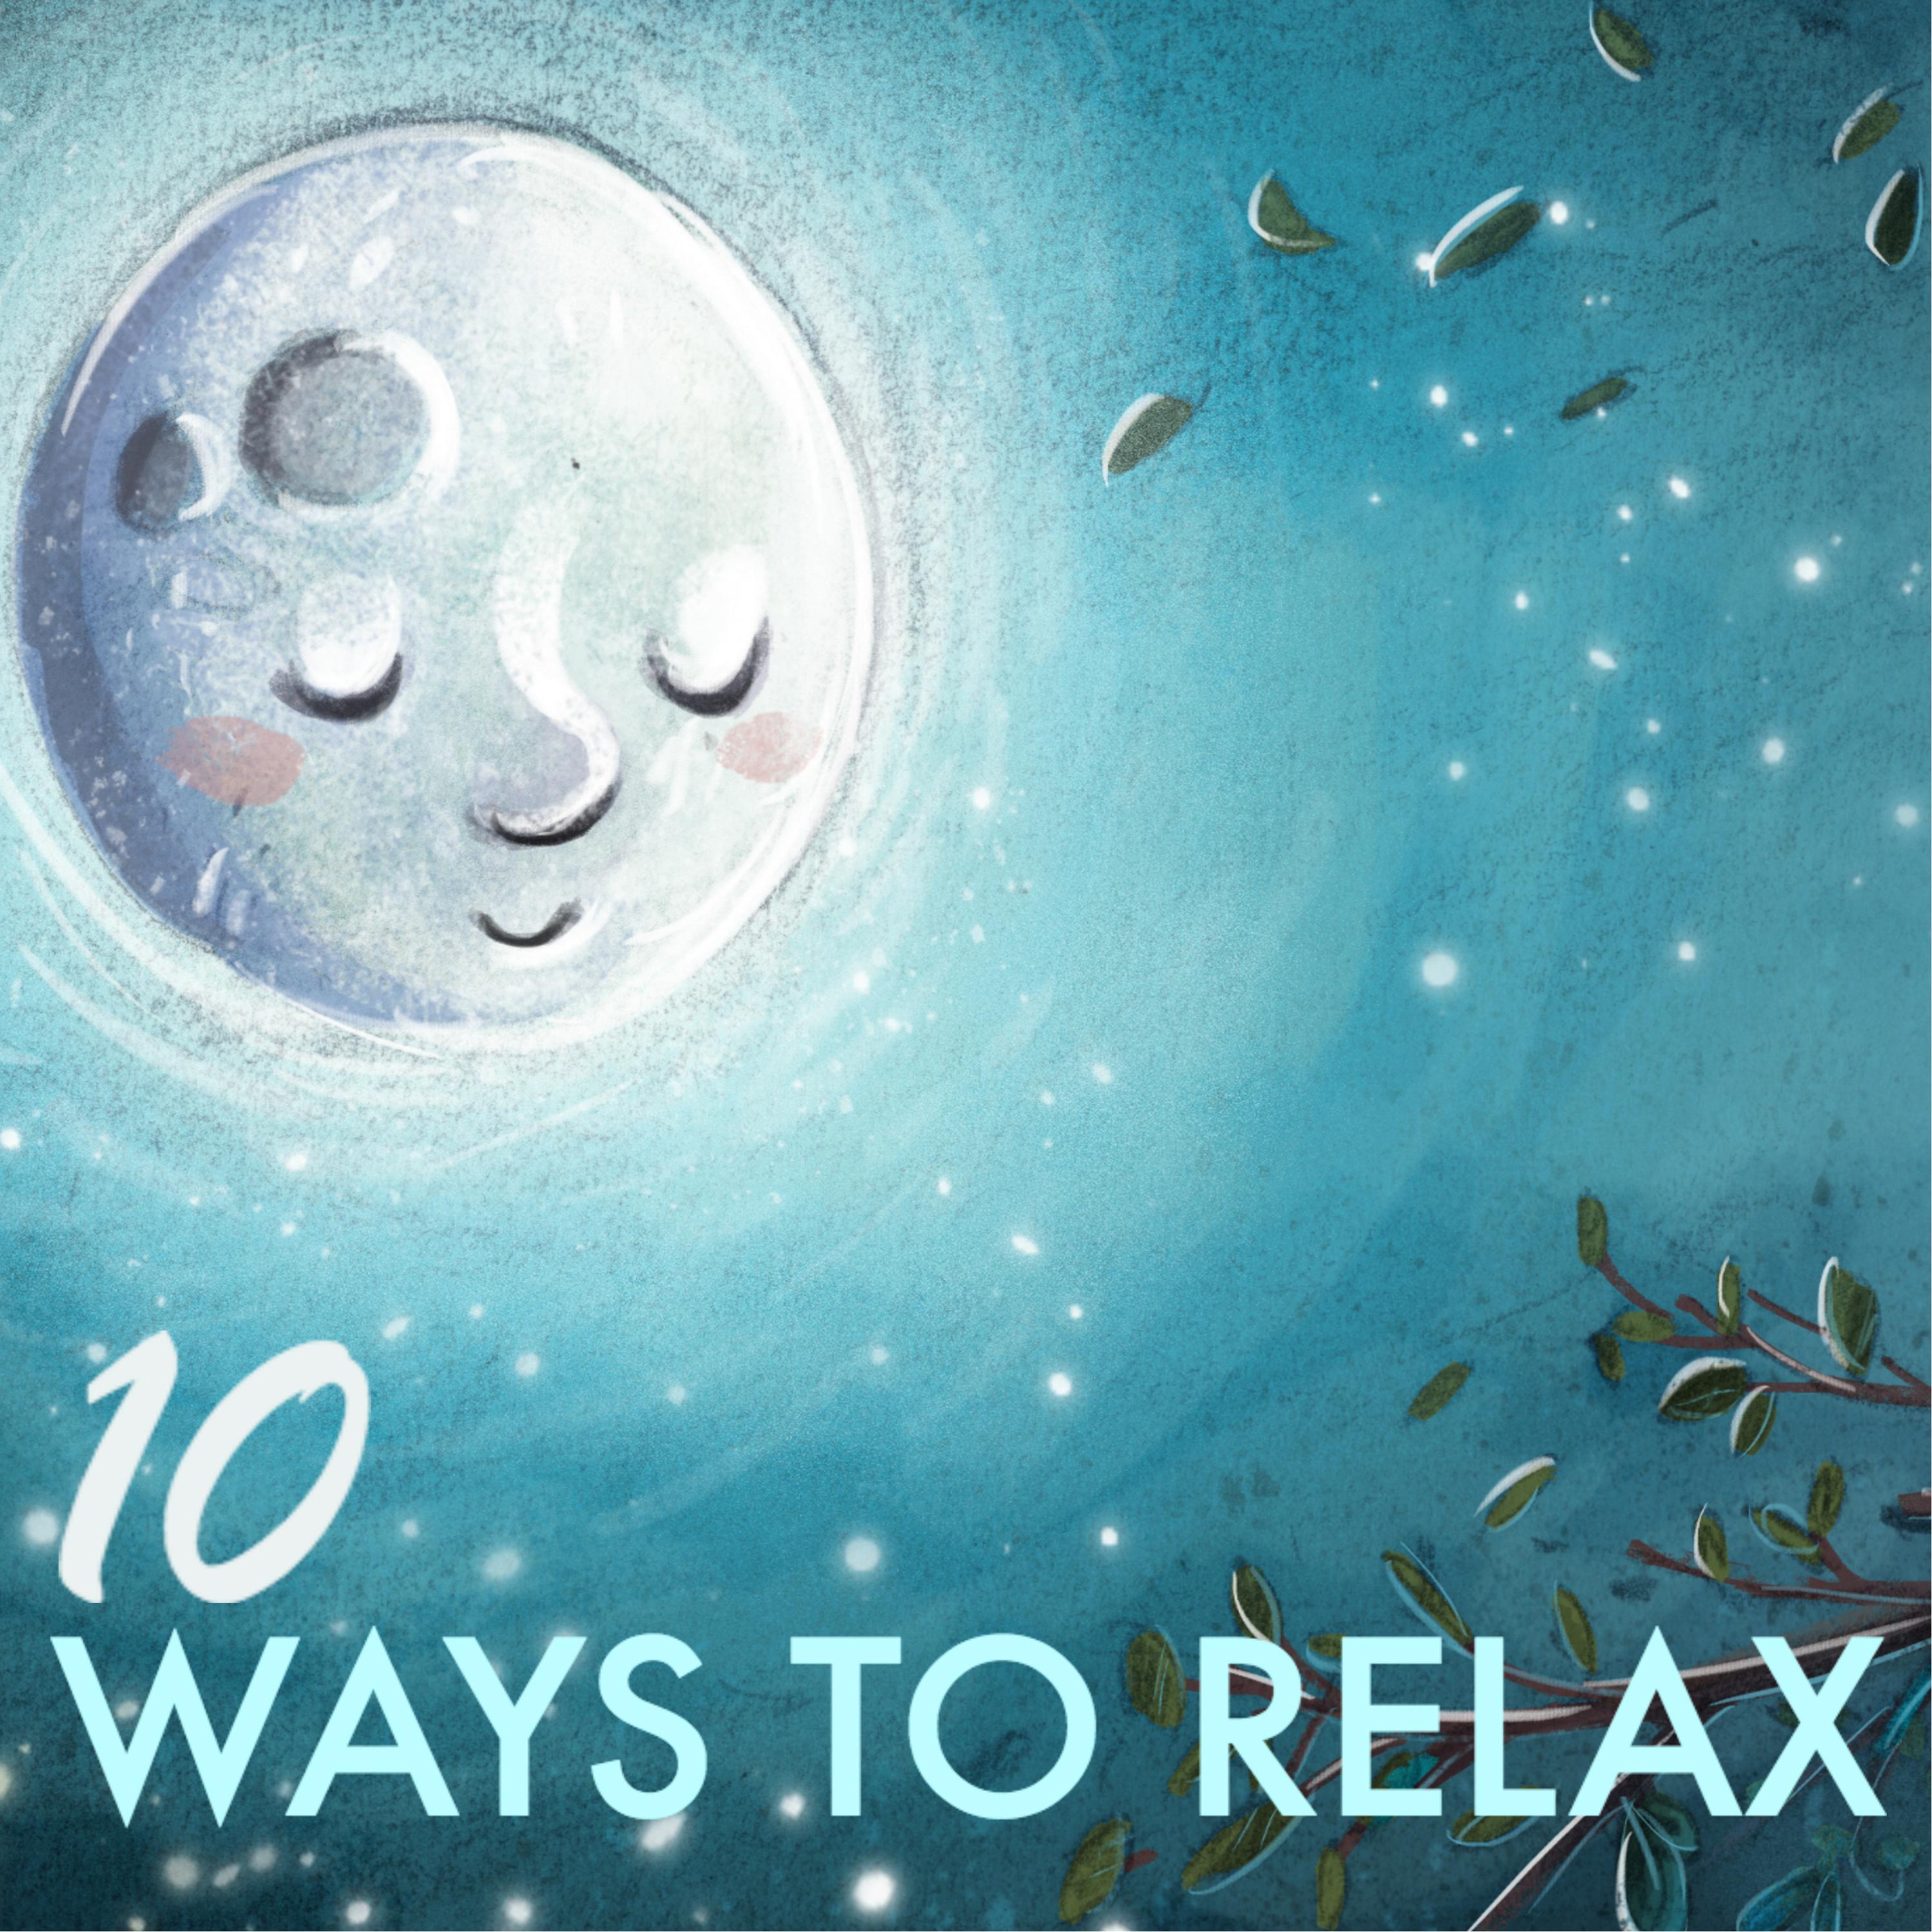 10 Ways to Relax - Stress Free Zone, Cure for Depression Tranquil Wellness Center Music